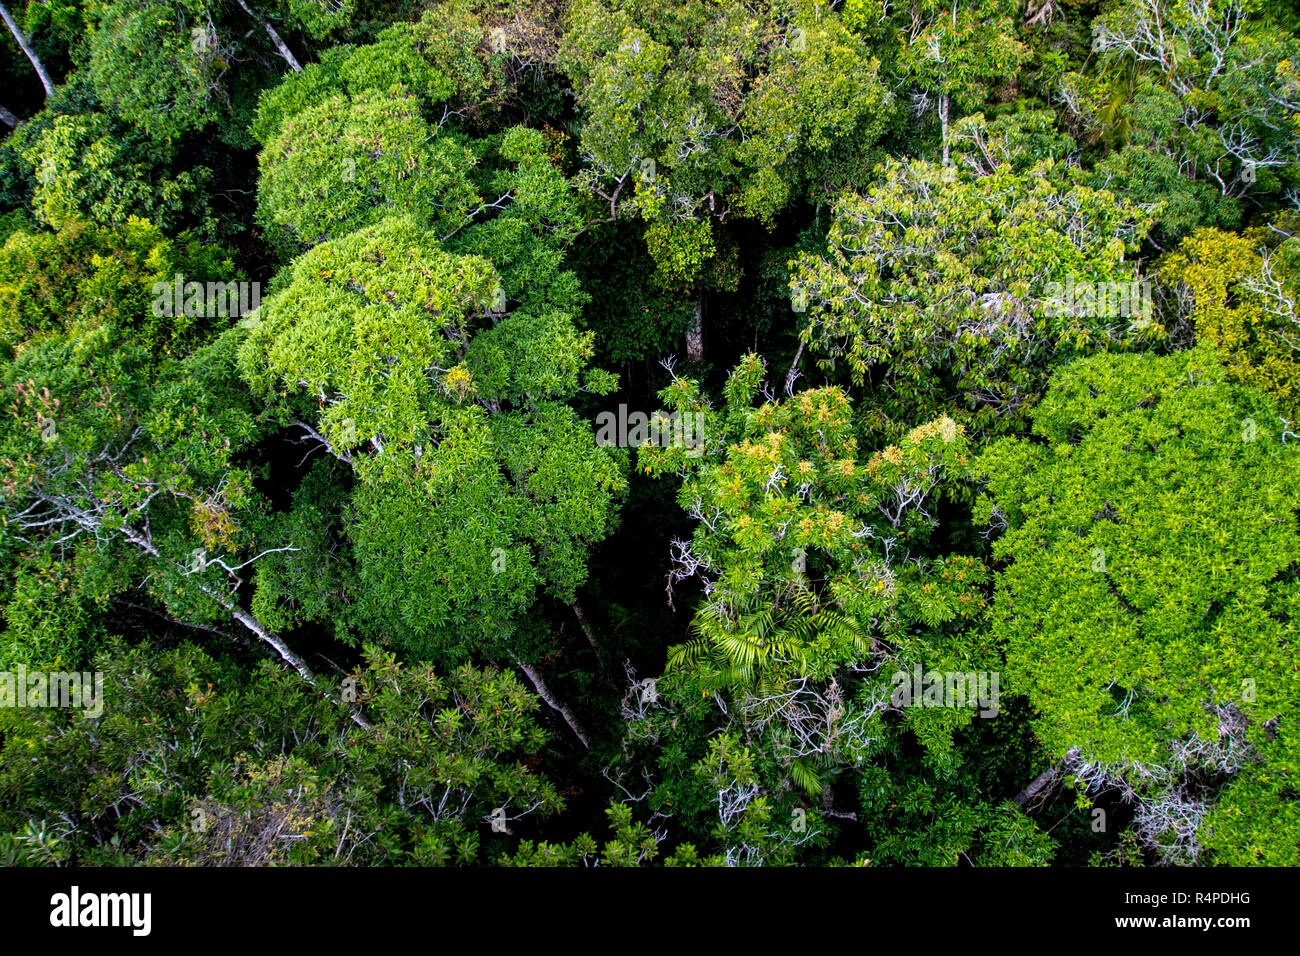 Dark moody tropical rainforest viewed from above Stock Photo